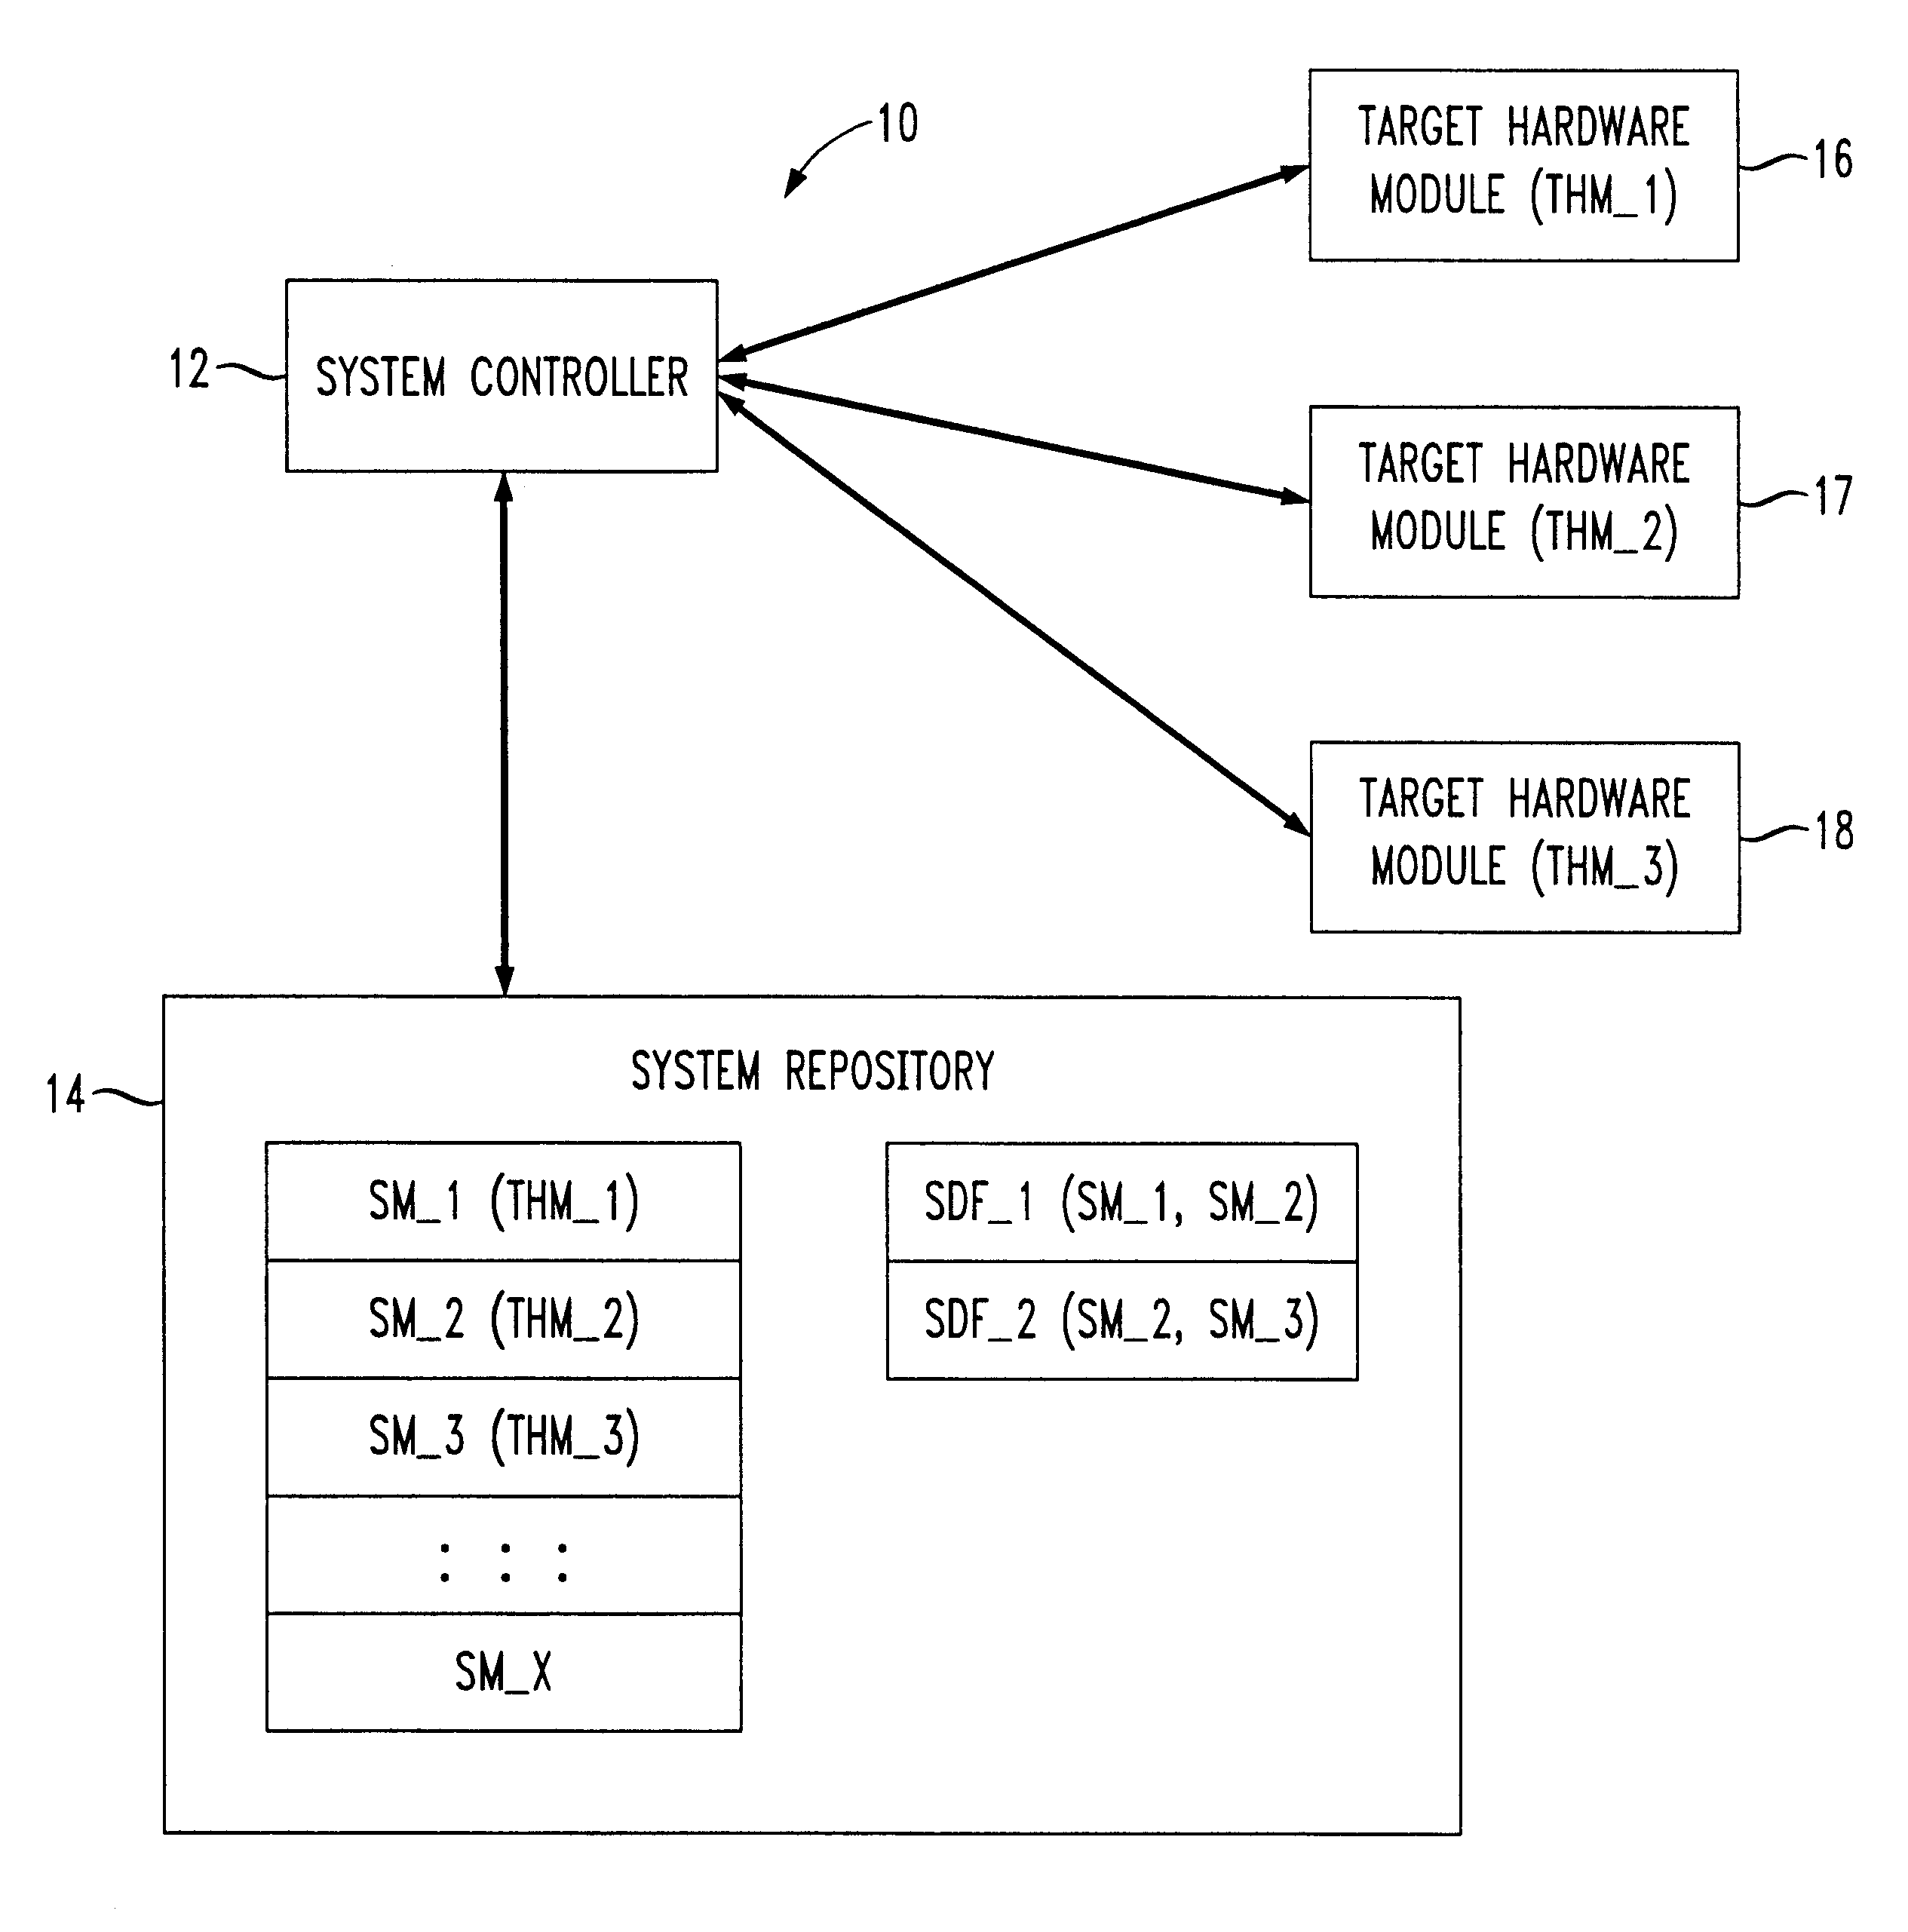 System and method for improved software configuration and control management in multi-module systems